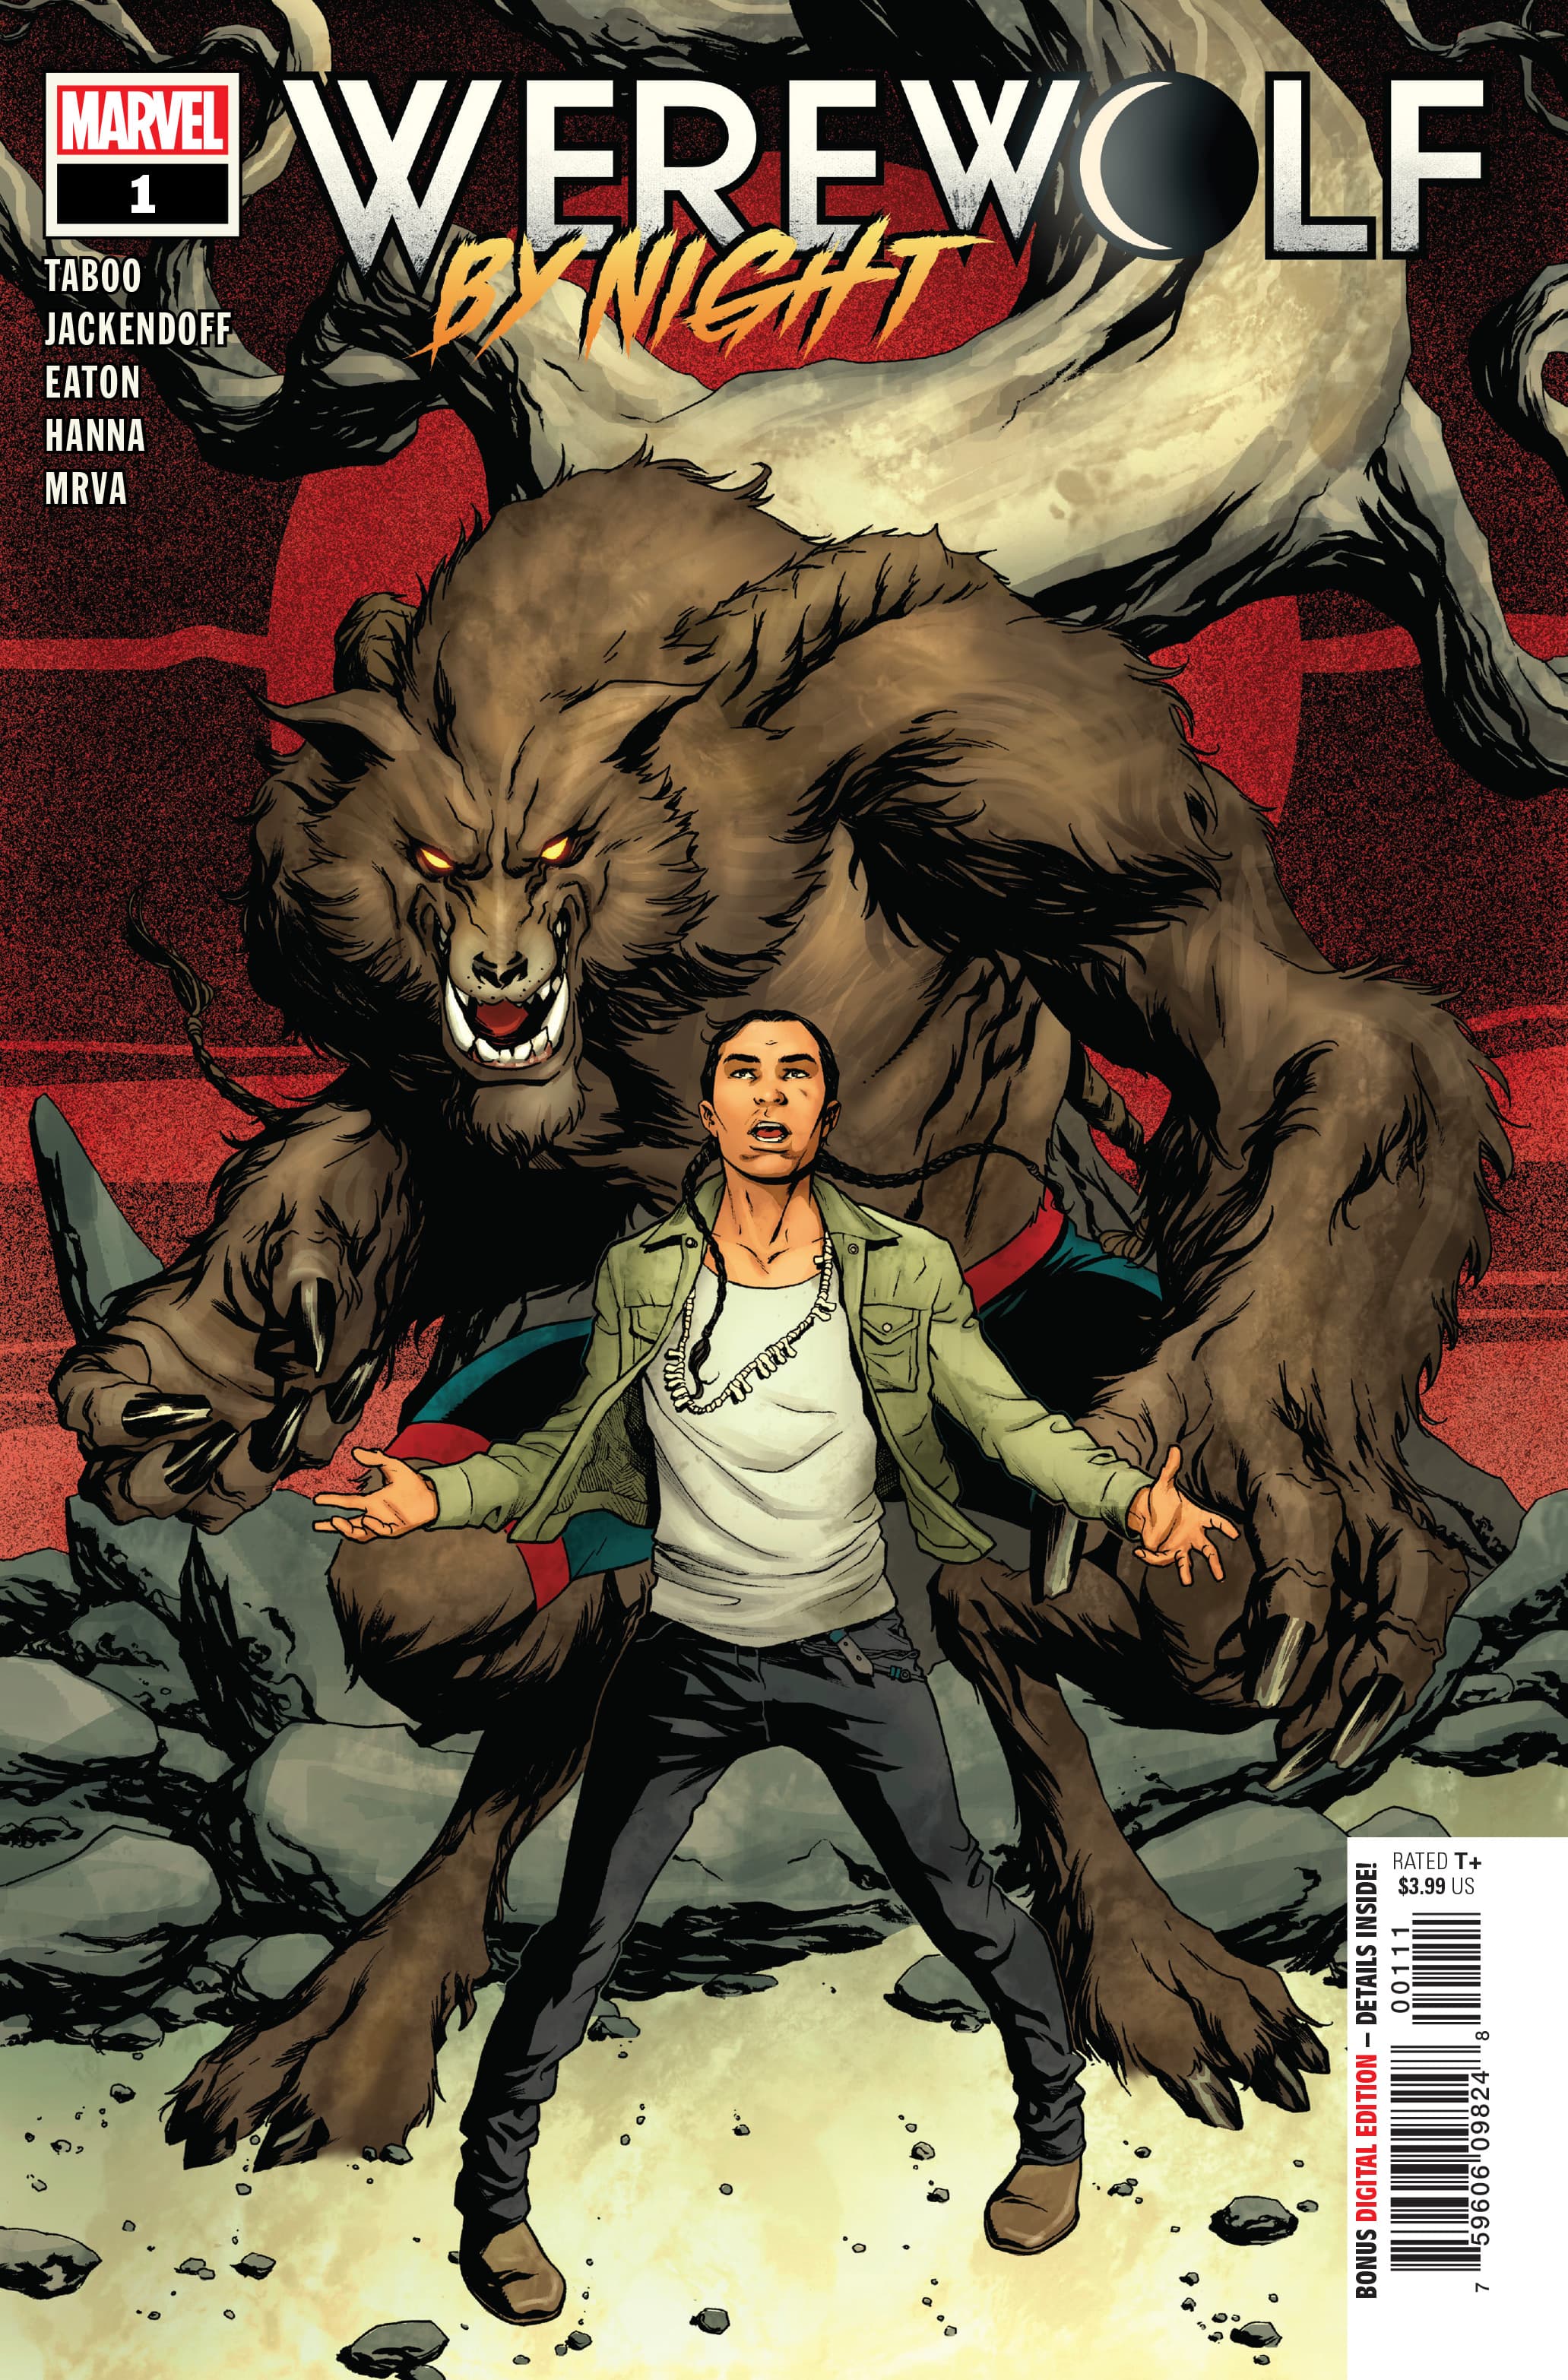 A New 'Werewolf by Night' Series Welcomes Marvel's Latest Monster